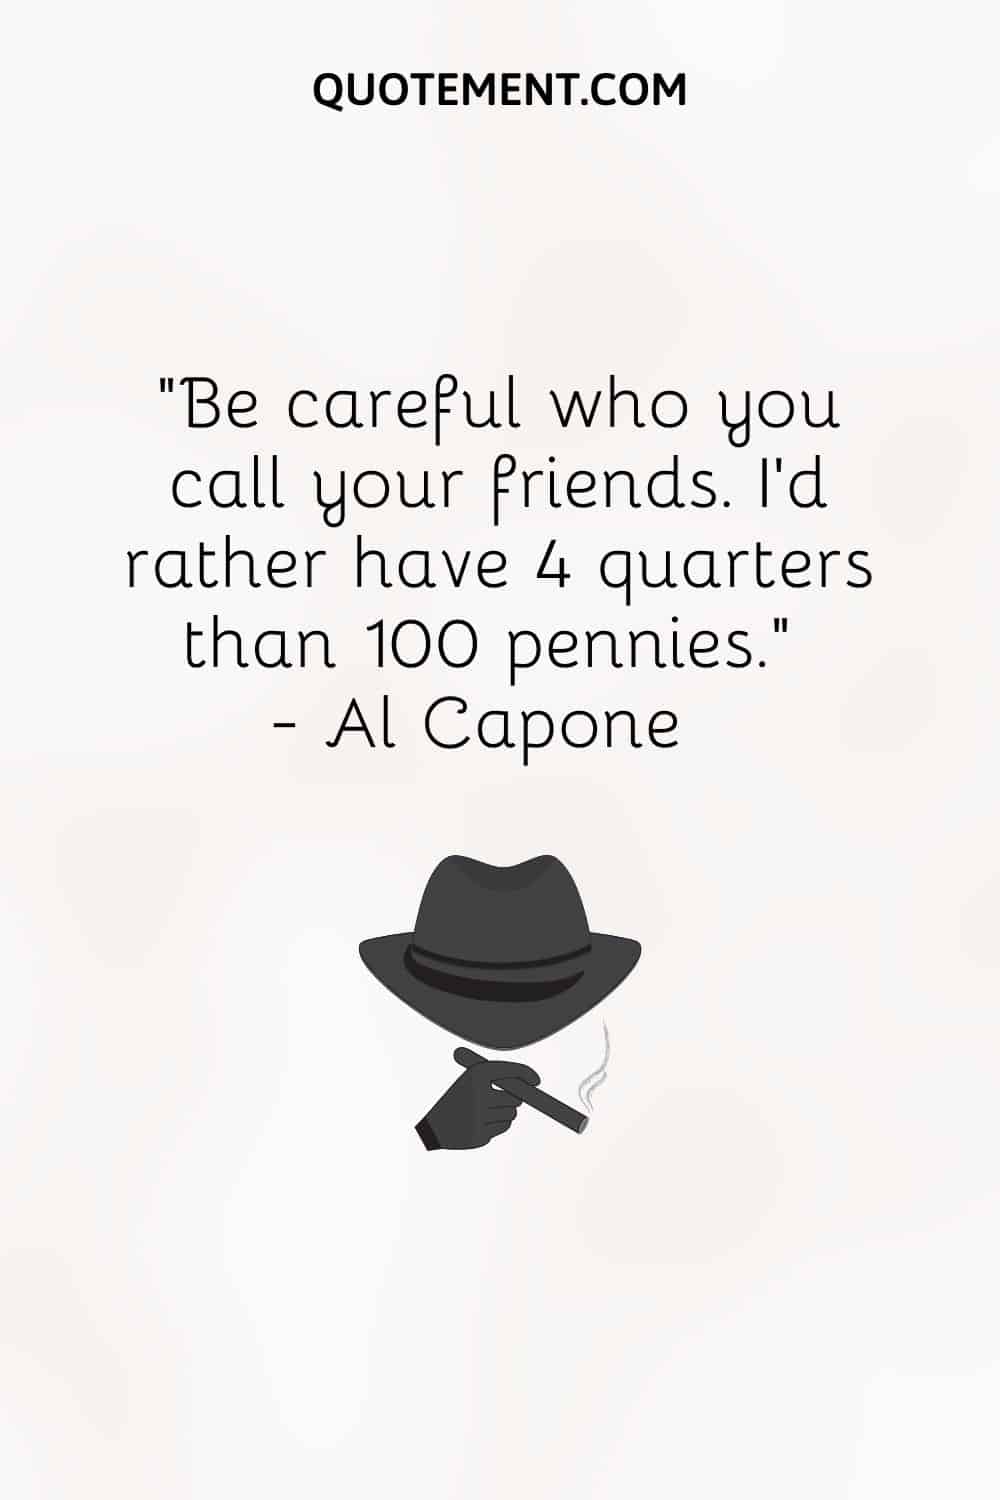 Be careful who you call your friends. I’d rather have 4 quarters than 100 pennies